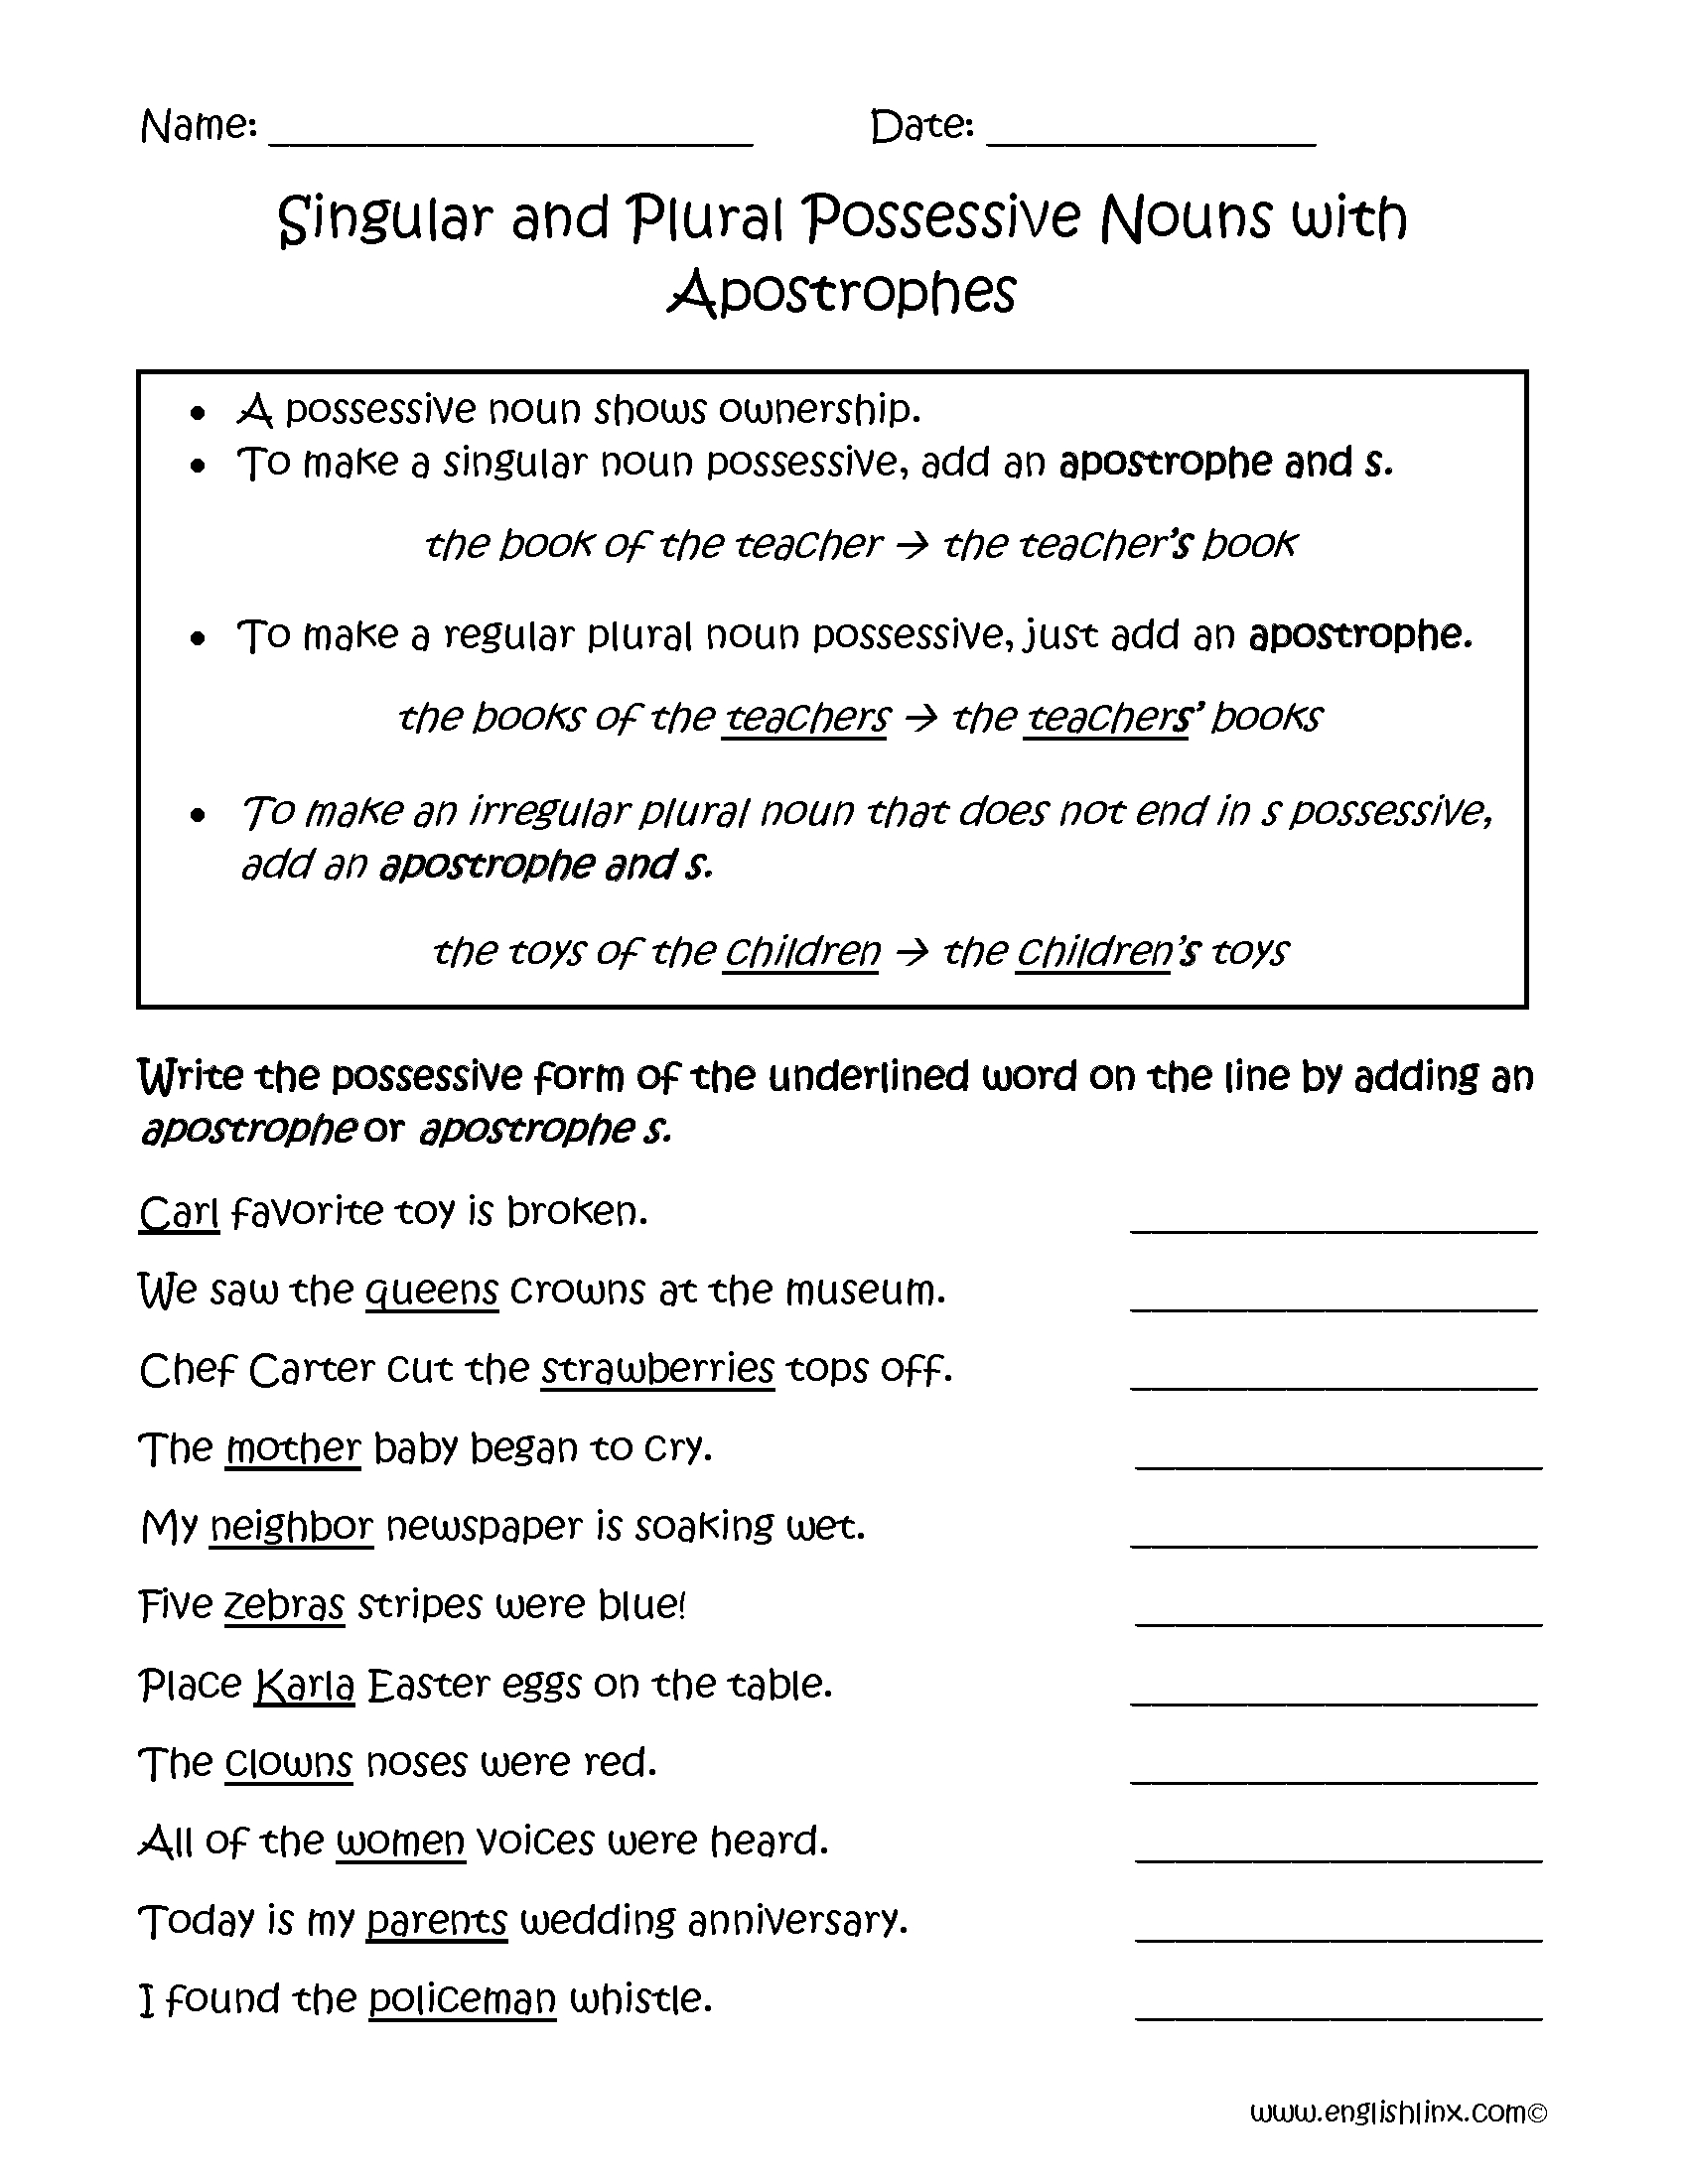 Singular And Plural Possessive Nouns With Apostrophes